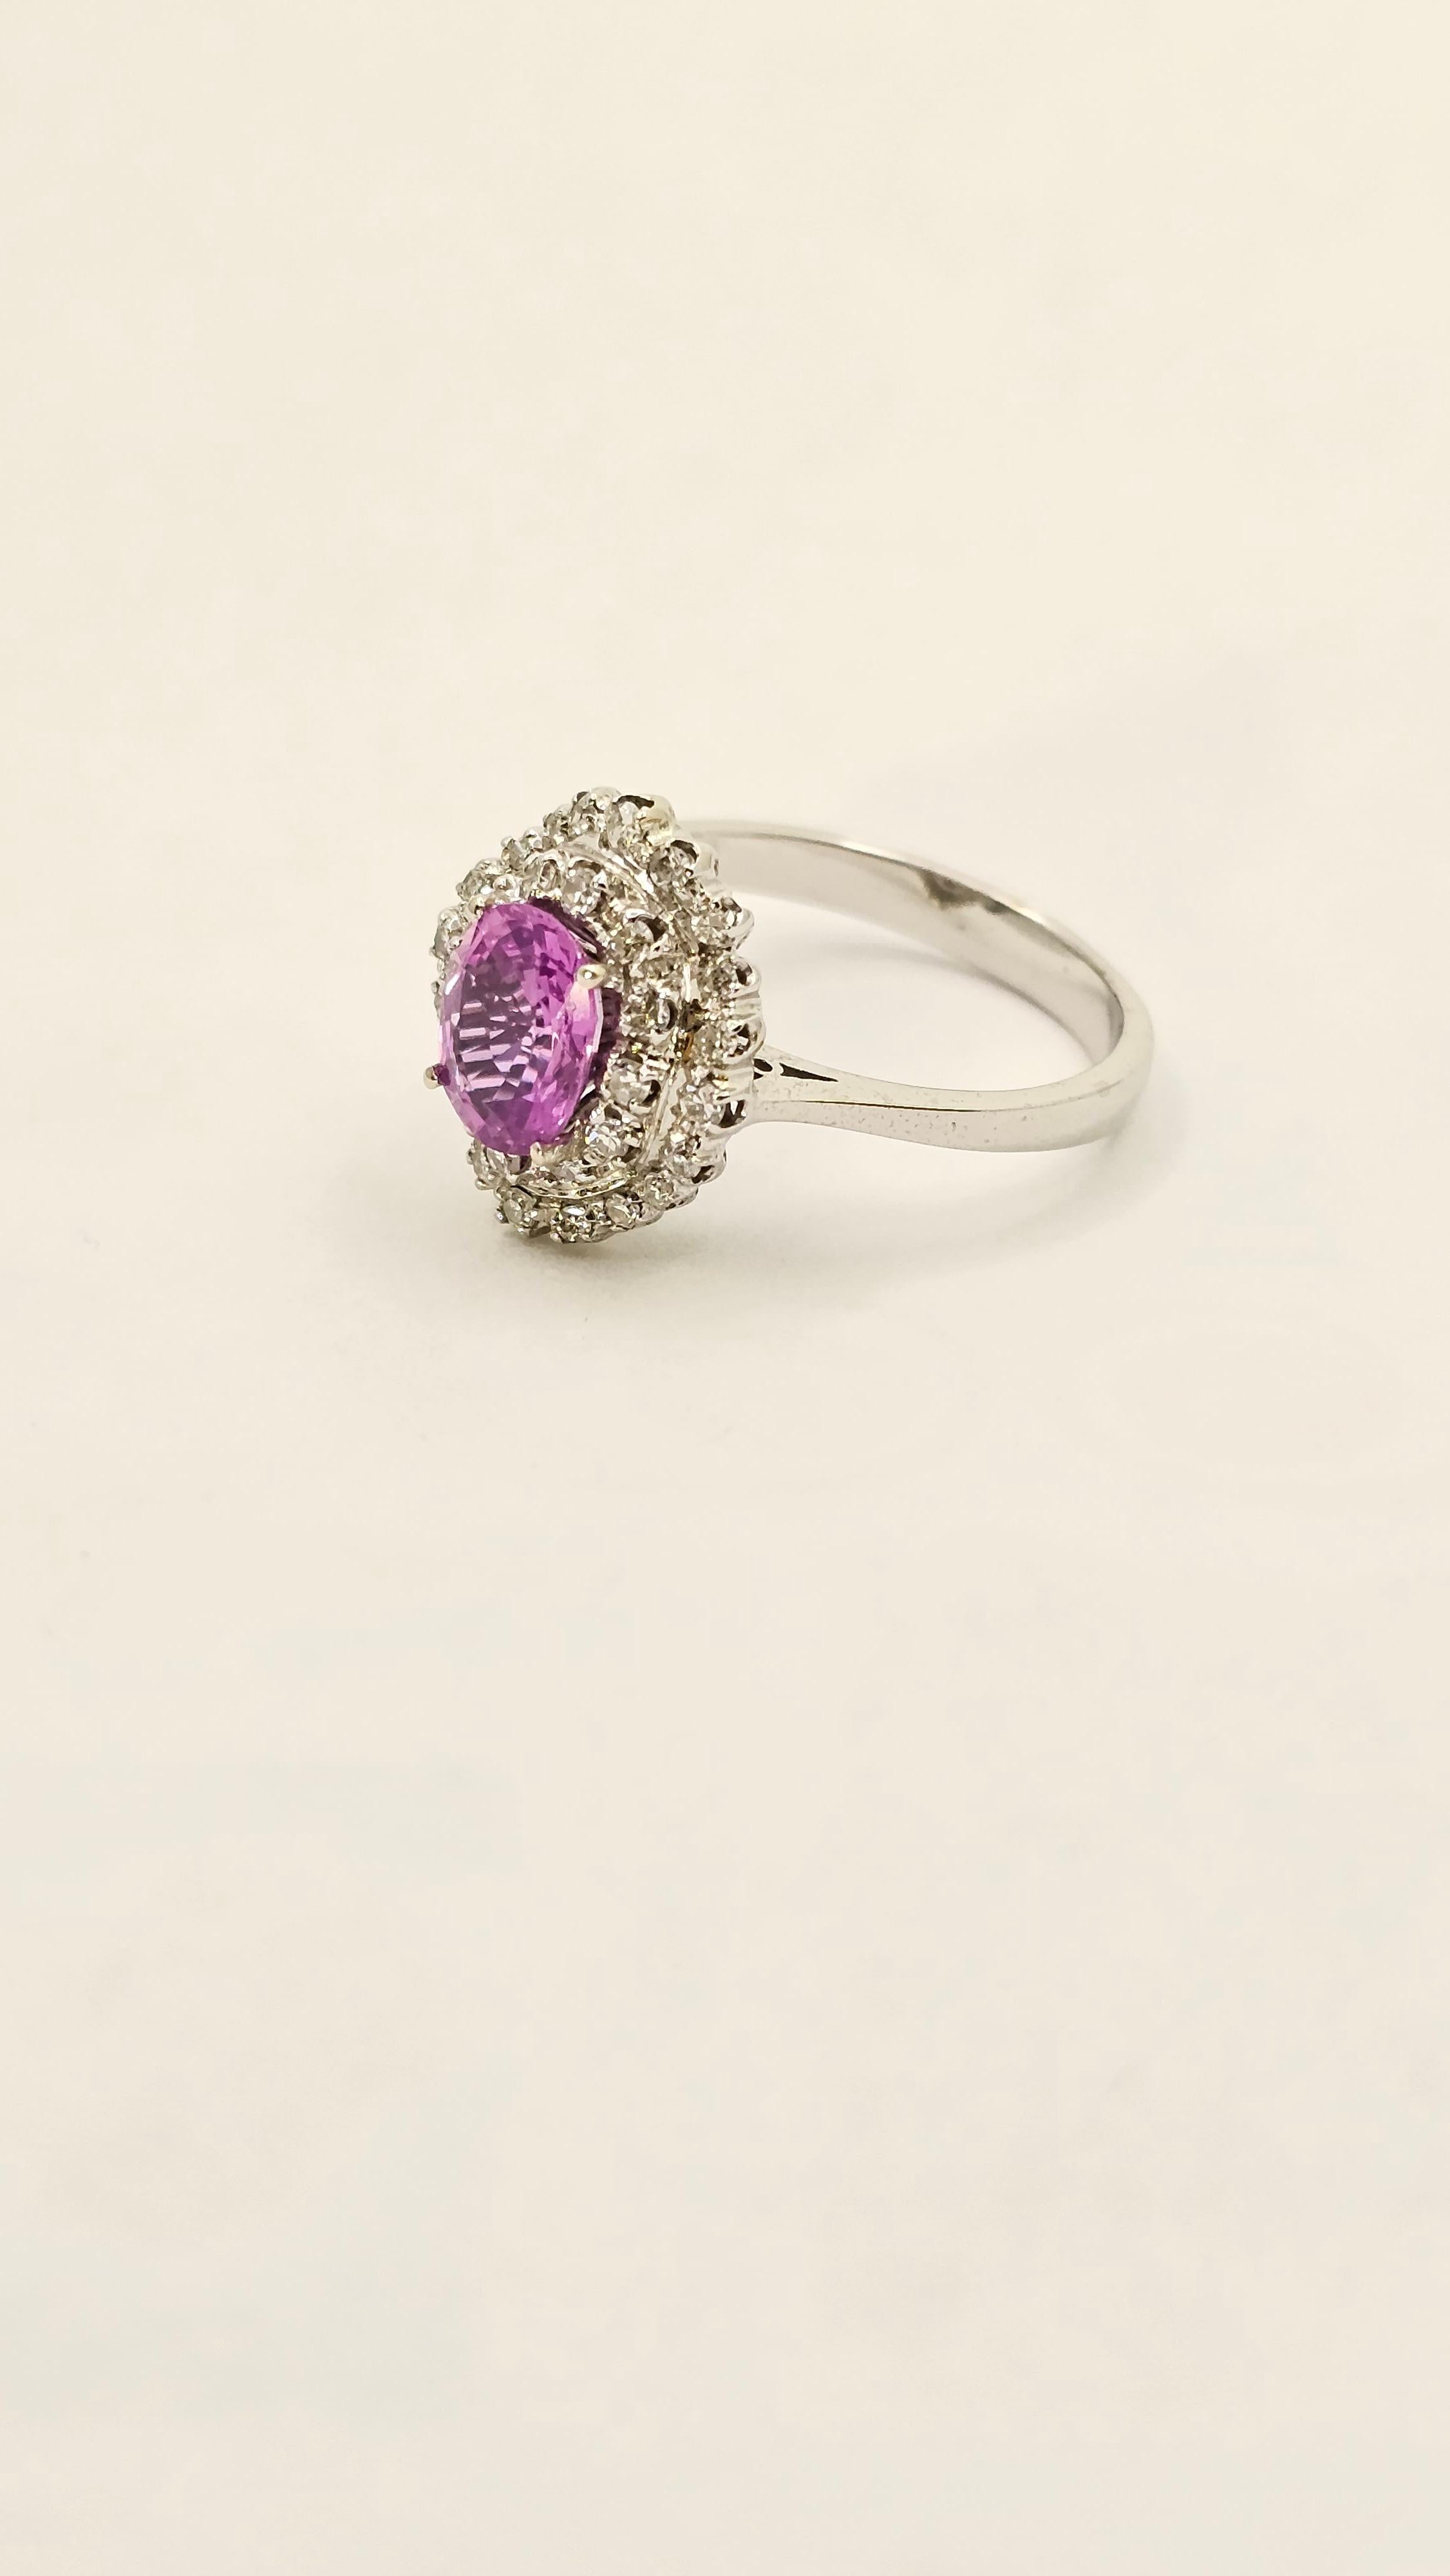 Handmade ring made in 18 Kt white gold ( gr 3.90 ).
The ring has an intense pink oval cut sapphire ( ct 1.27 ) and two row of white diamonds.
The ring is new and It comes with warranty certificate.
Ring size 6 ( 52 and an half ). This ring can be